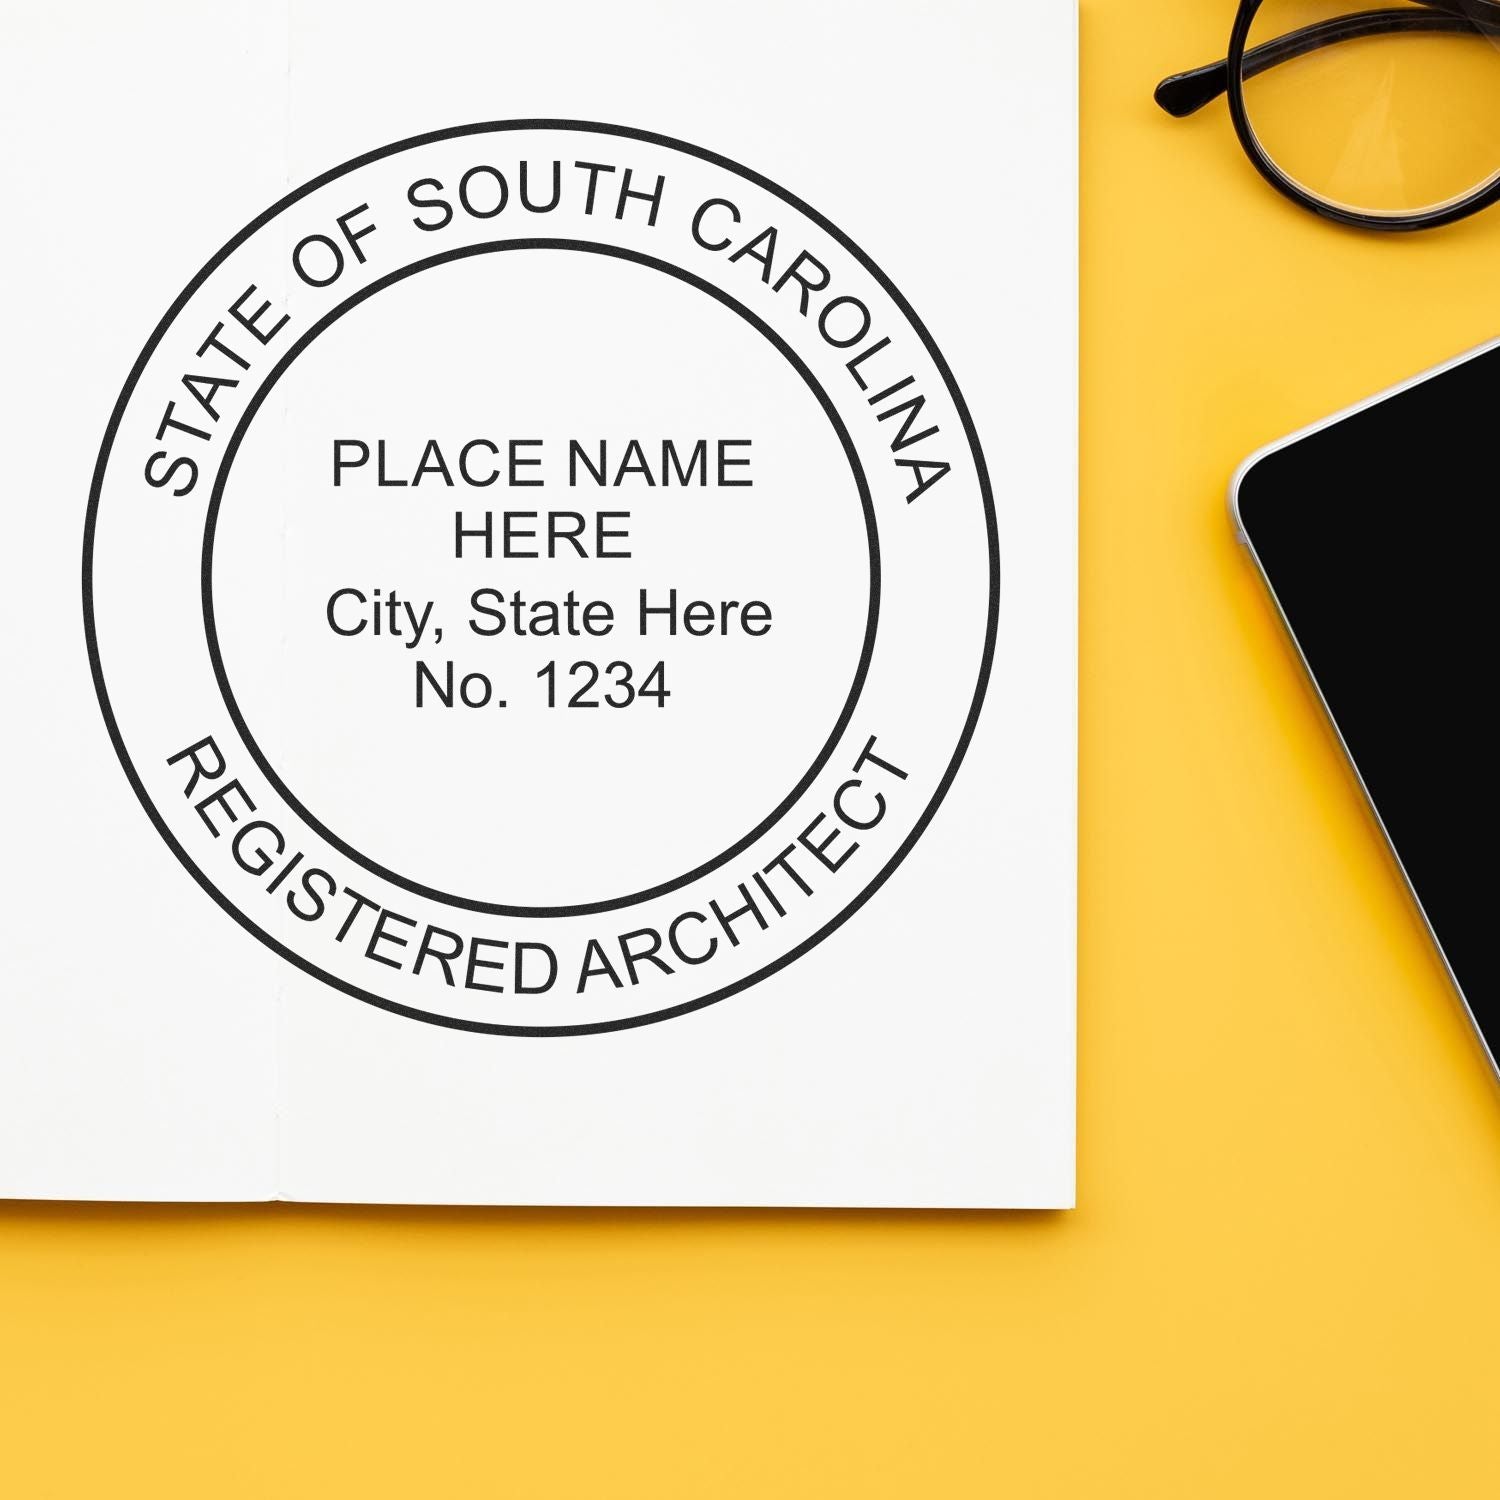 South Carolina Architect Stamp: Empowering Architects to Leave their Mark Feature Image